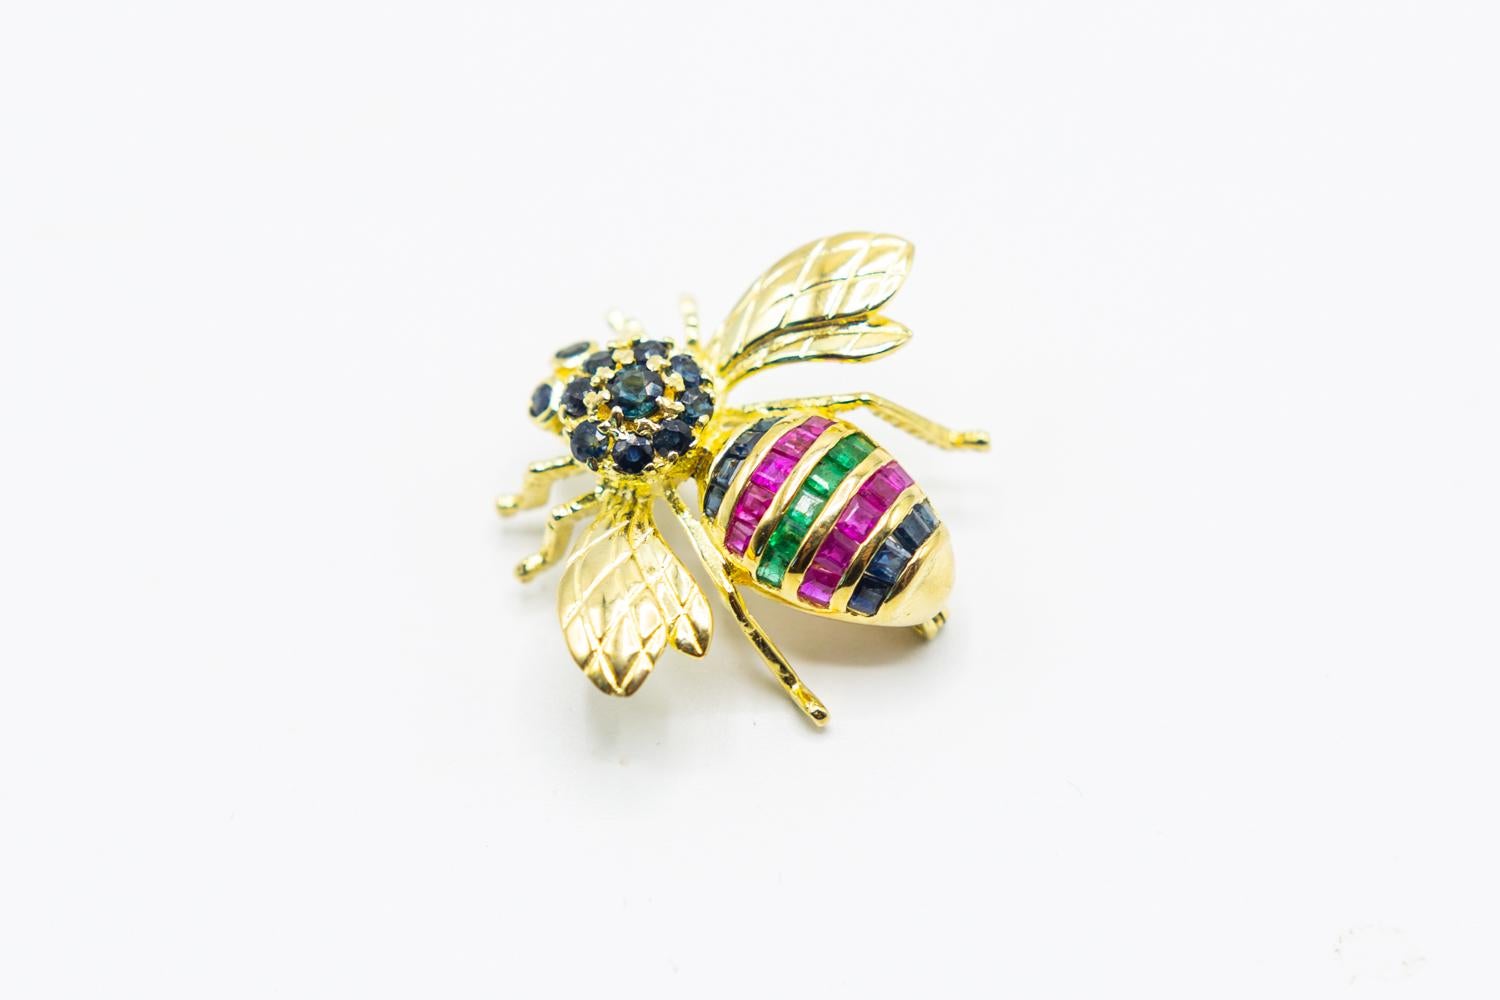 14K yellow gold brooch featuring 0.50 carats of square step cut and round modified-brilliant sapphires, 0.50 carats of square step cut rubies and 0.30 carats of square step-cut emeralds with pin closure.